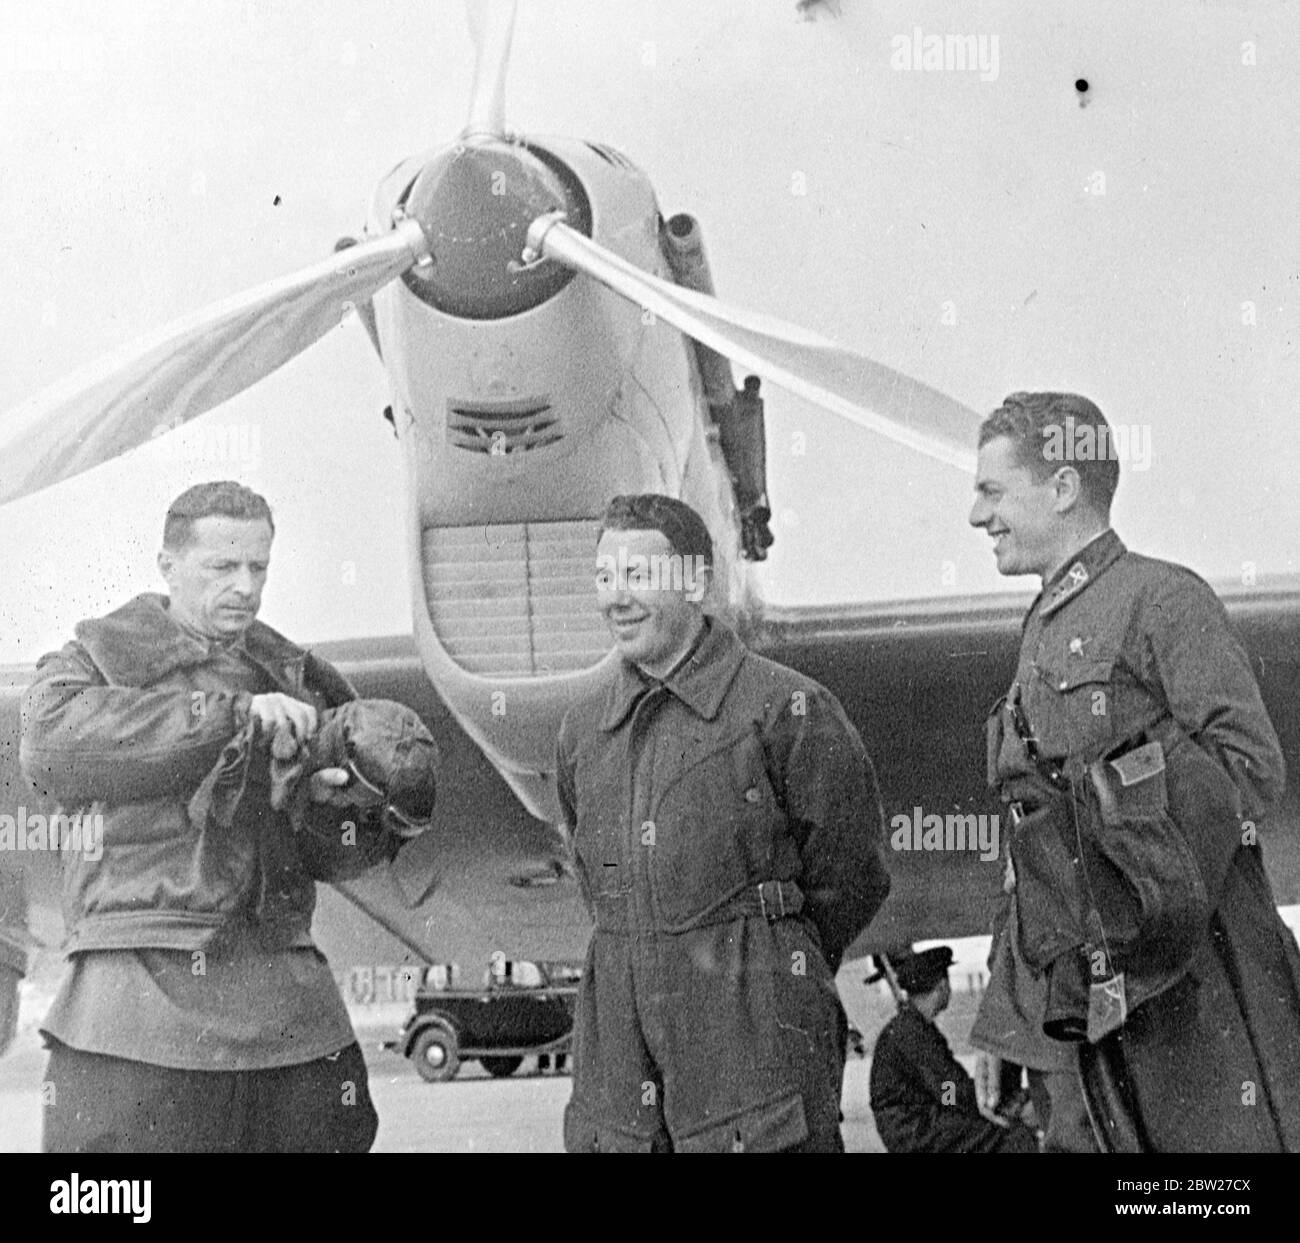 Three airmen Soviet Mikhall M. Gromov major A.B.Yumashev, and engineer S.A Danilin, about to take off from the Shchelkovo Aerodrome near Moscow has landed near San Jacinto 70 miles east of Los Angeles after a flight over the North Pole to break the world's long distance record. The Russians flew 6625 miles in 61 hours seven minutes nearly 1000 miles better than the previous record set by Codos and Rossi of France. 15 July 1937. Stock Photo